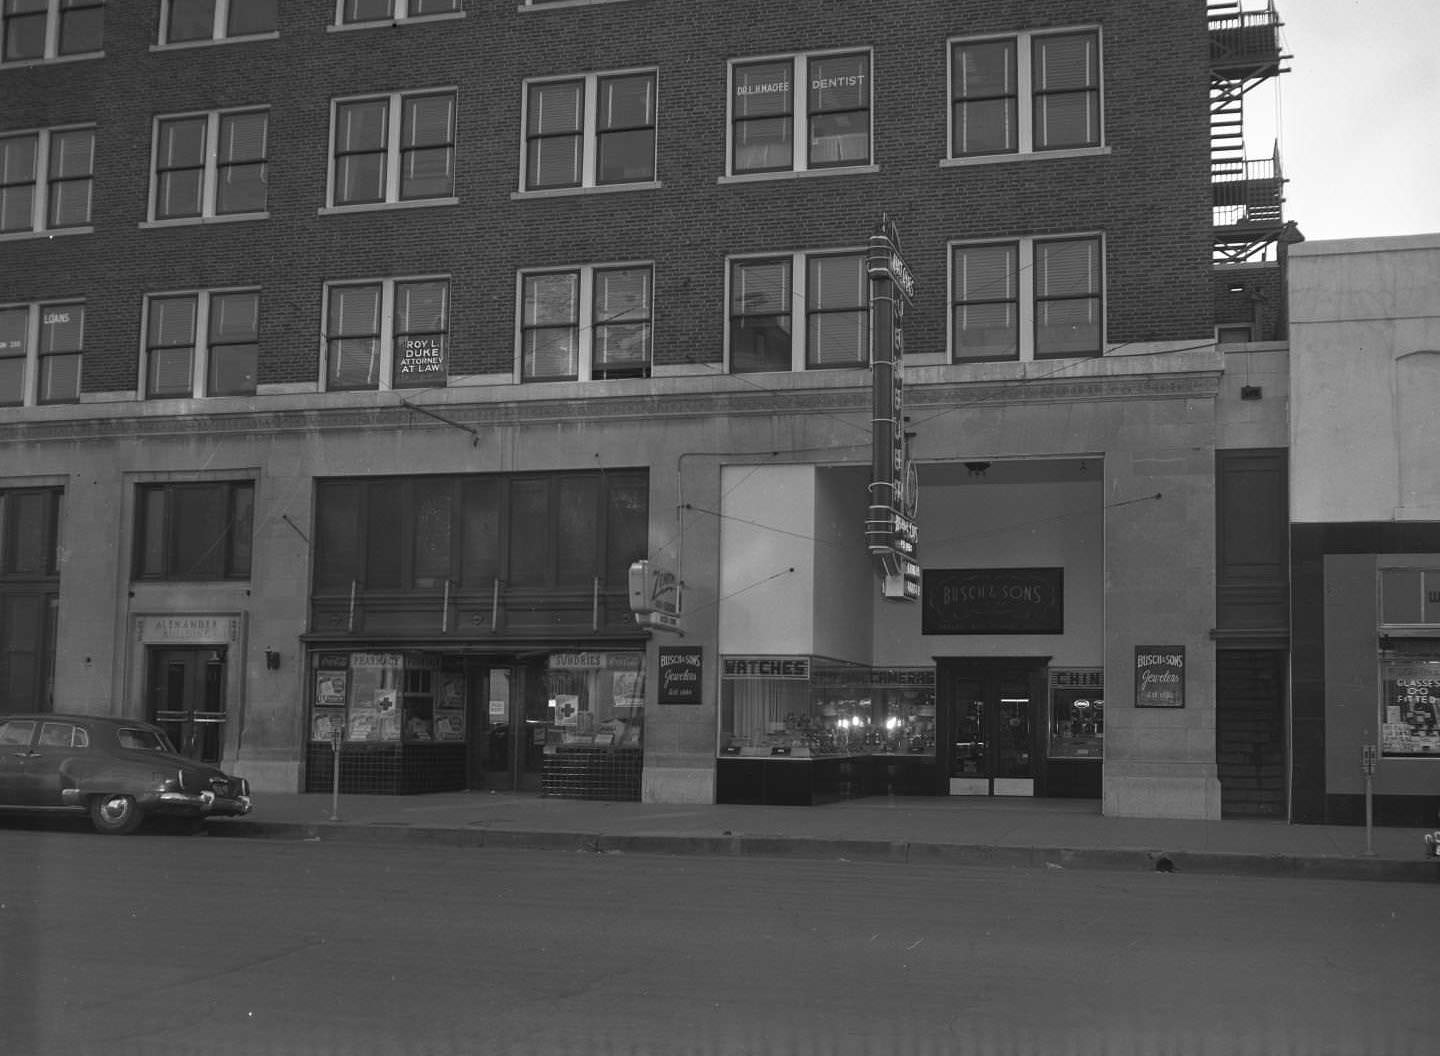 The Busch and Sons jewelry store, taken from across the street, 1955